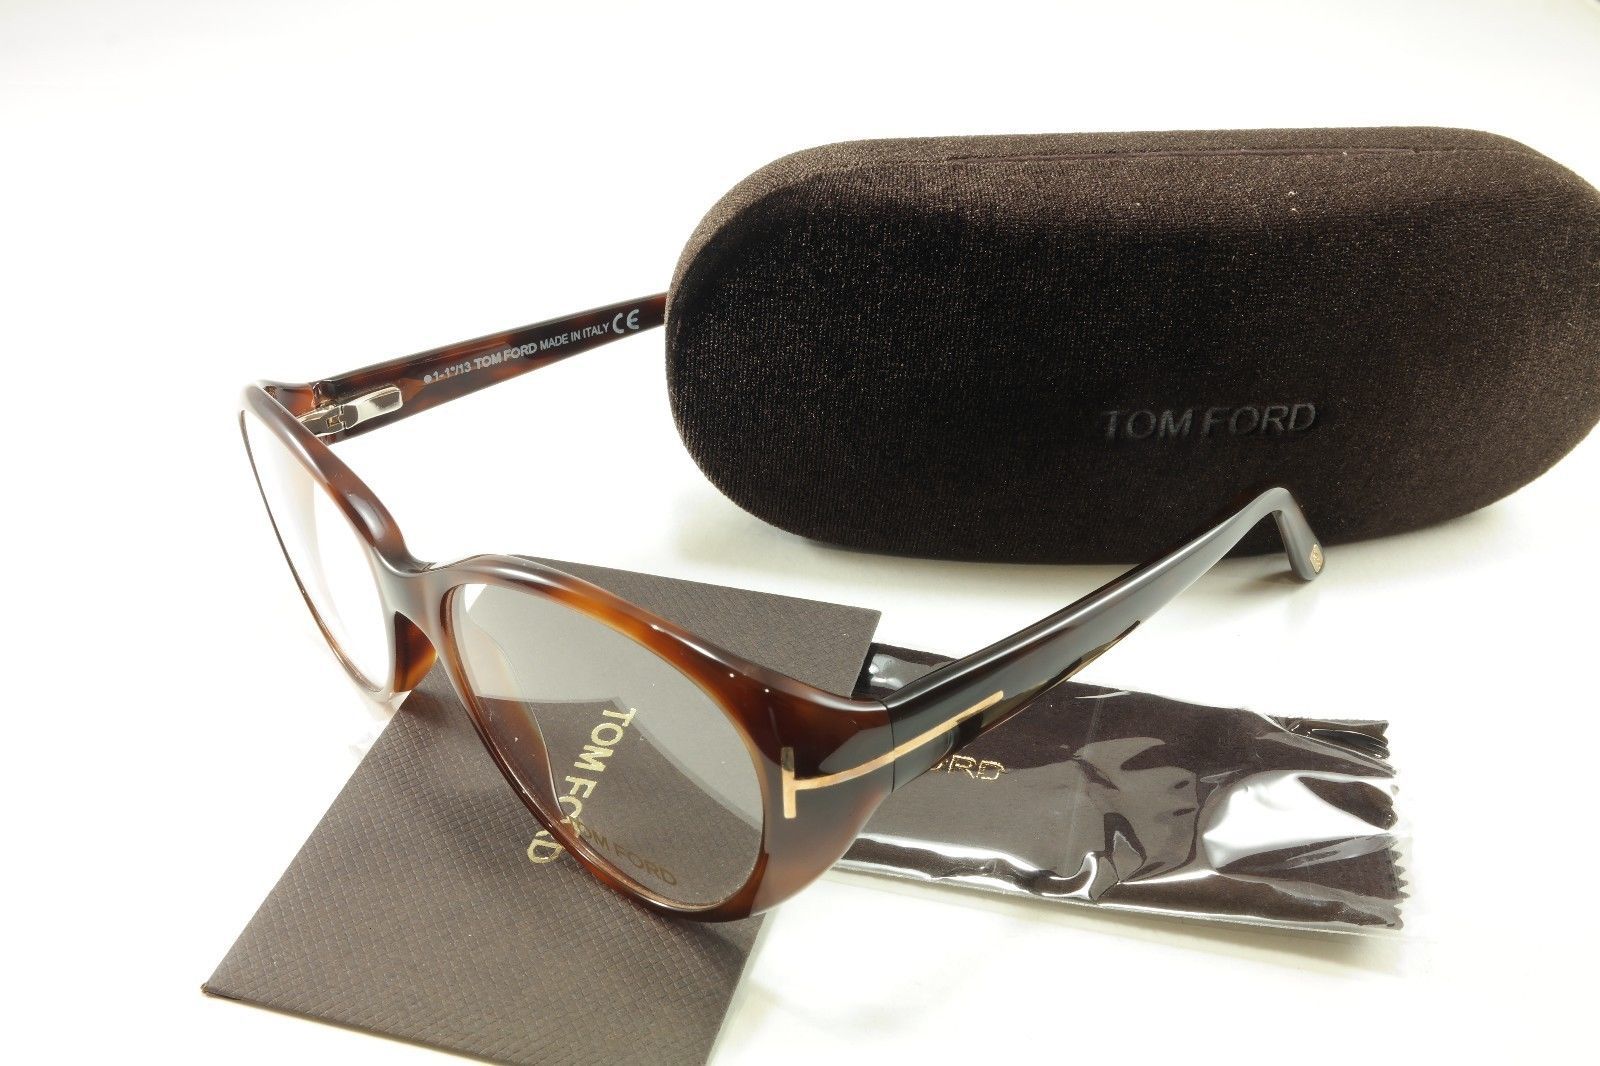 Authentic Tom Ford Eyeglasses Frame TF5245 052 Havana Brown Italy Made 53-15-135 - $133.62